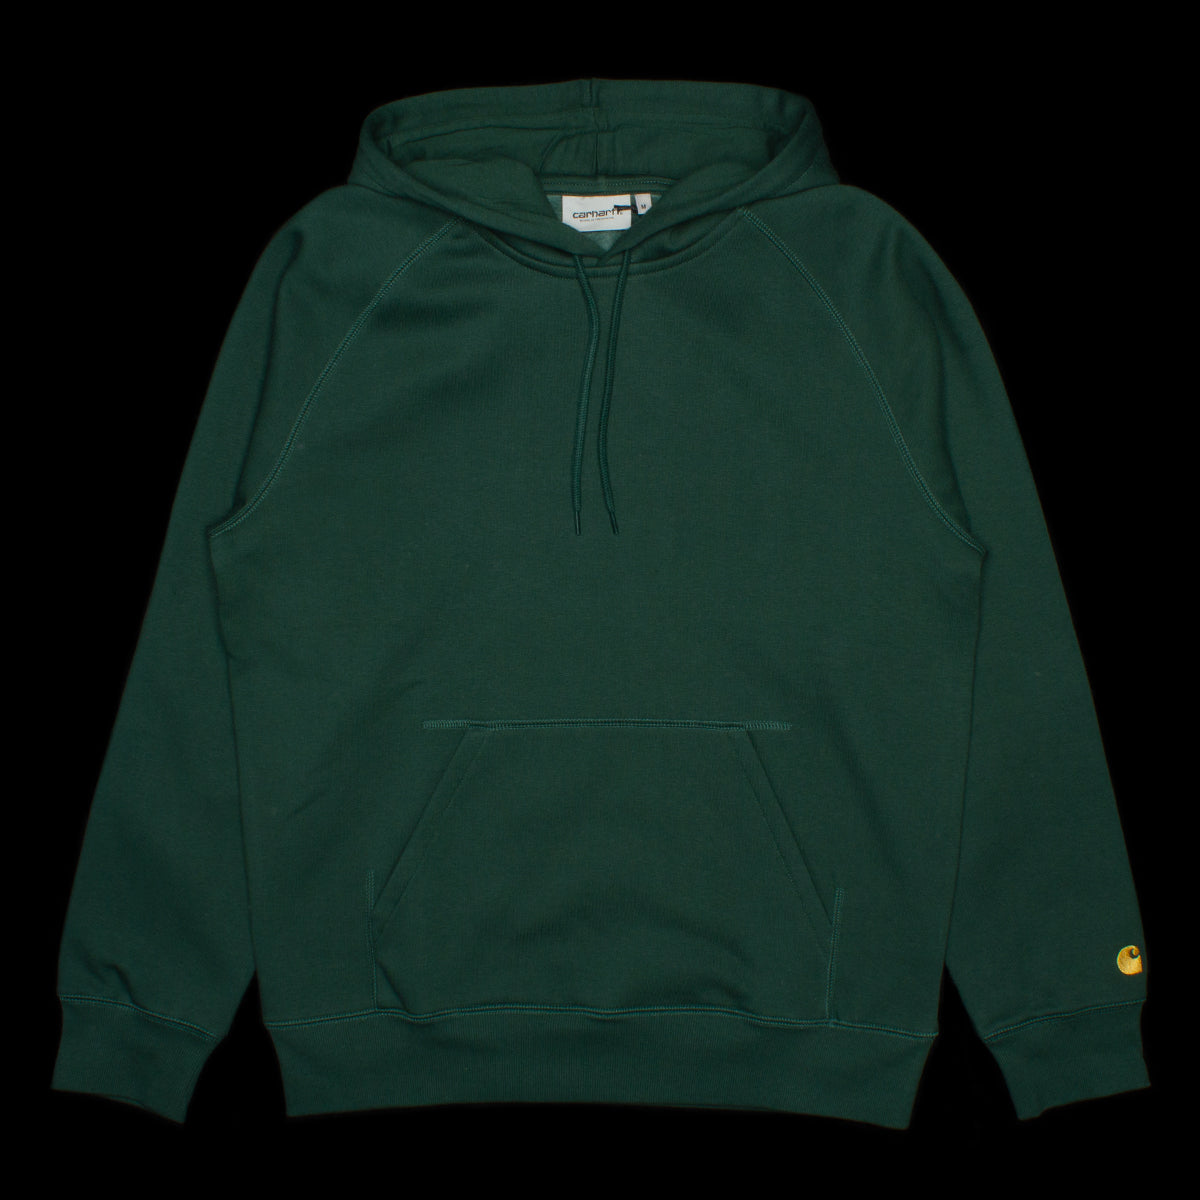 Carhartt WIP Hooded Chase Sweatshirt Style # I026384-1NV Color : Discovery Green / Gold